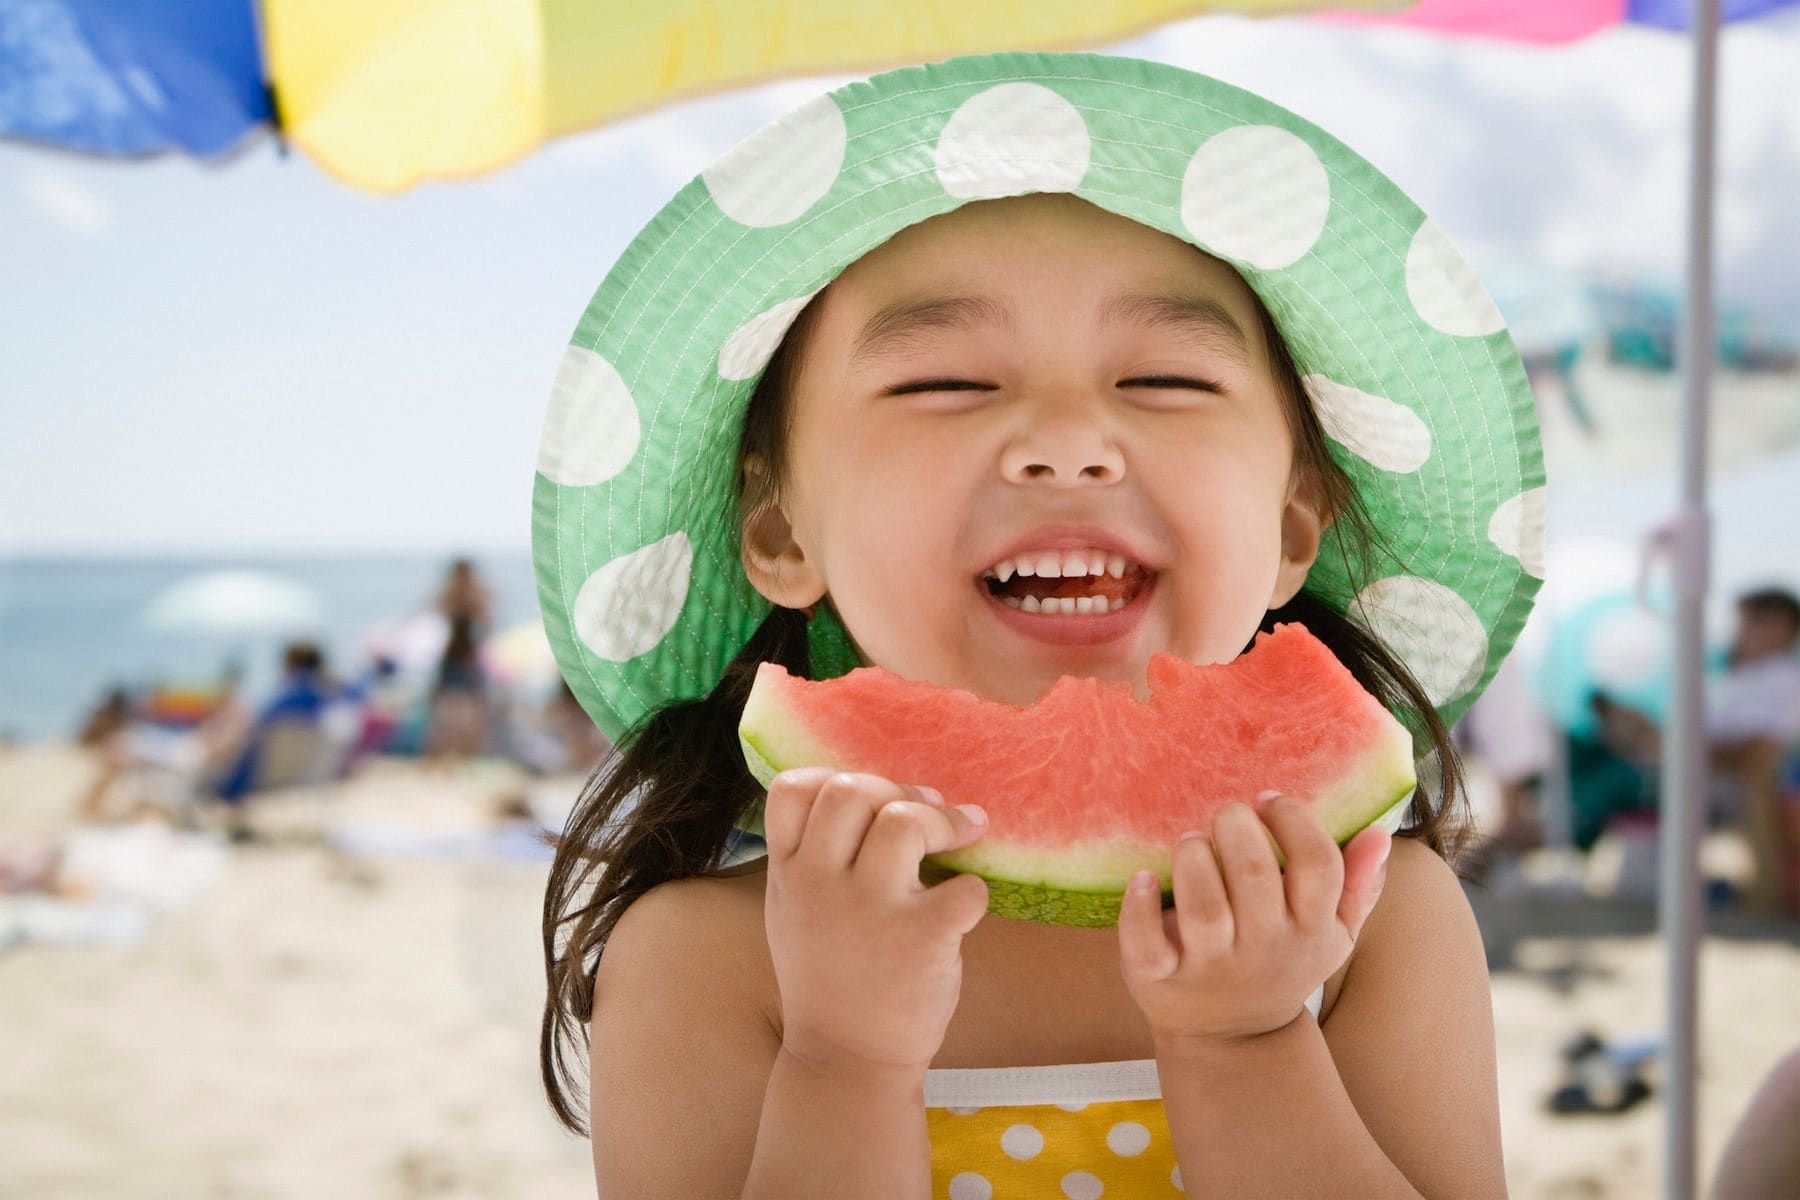 17 Things to Do at the Beach with Kids